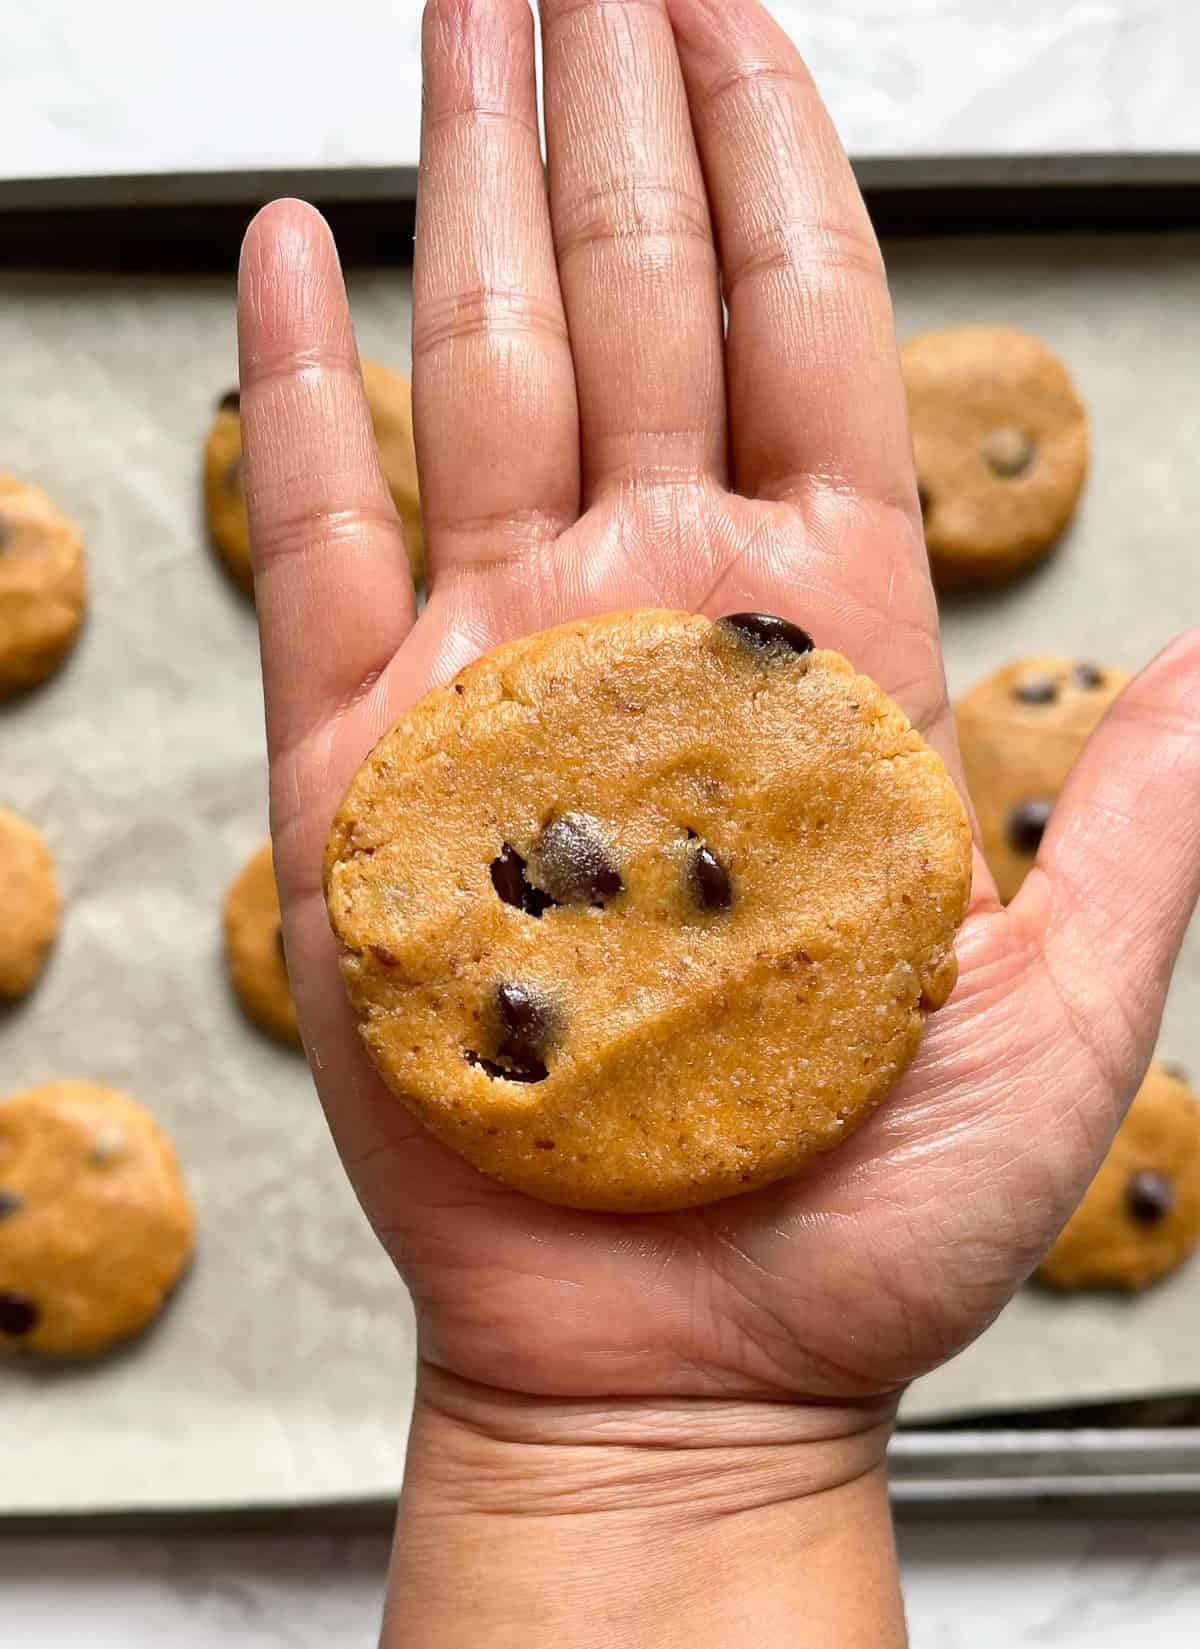 Flattening cookies on the palm